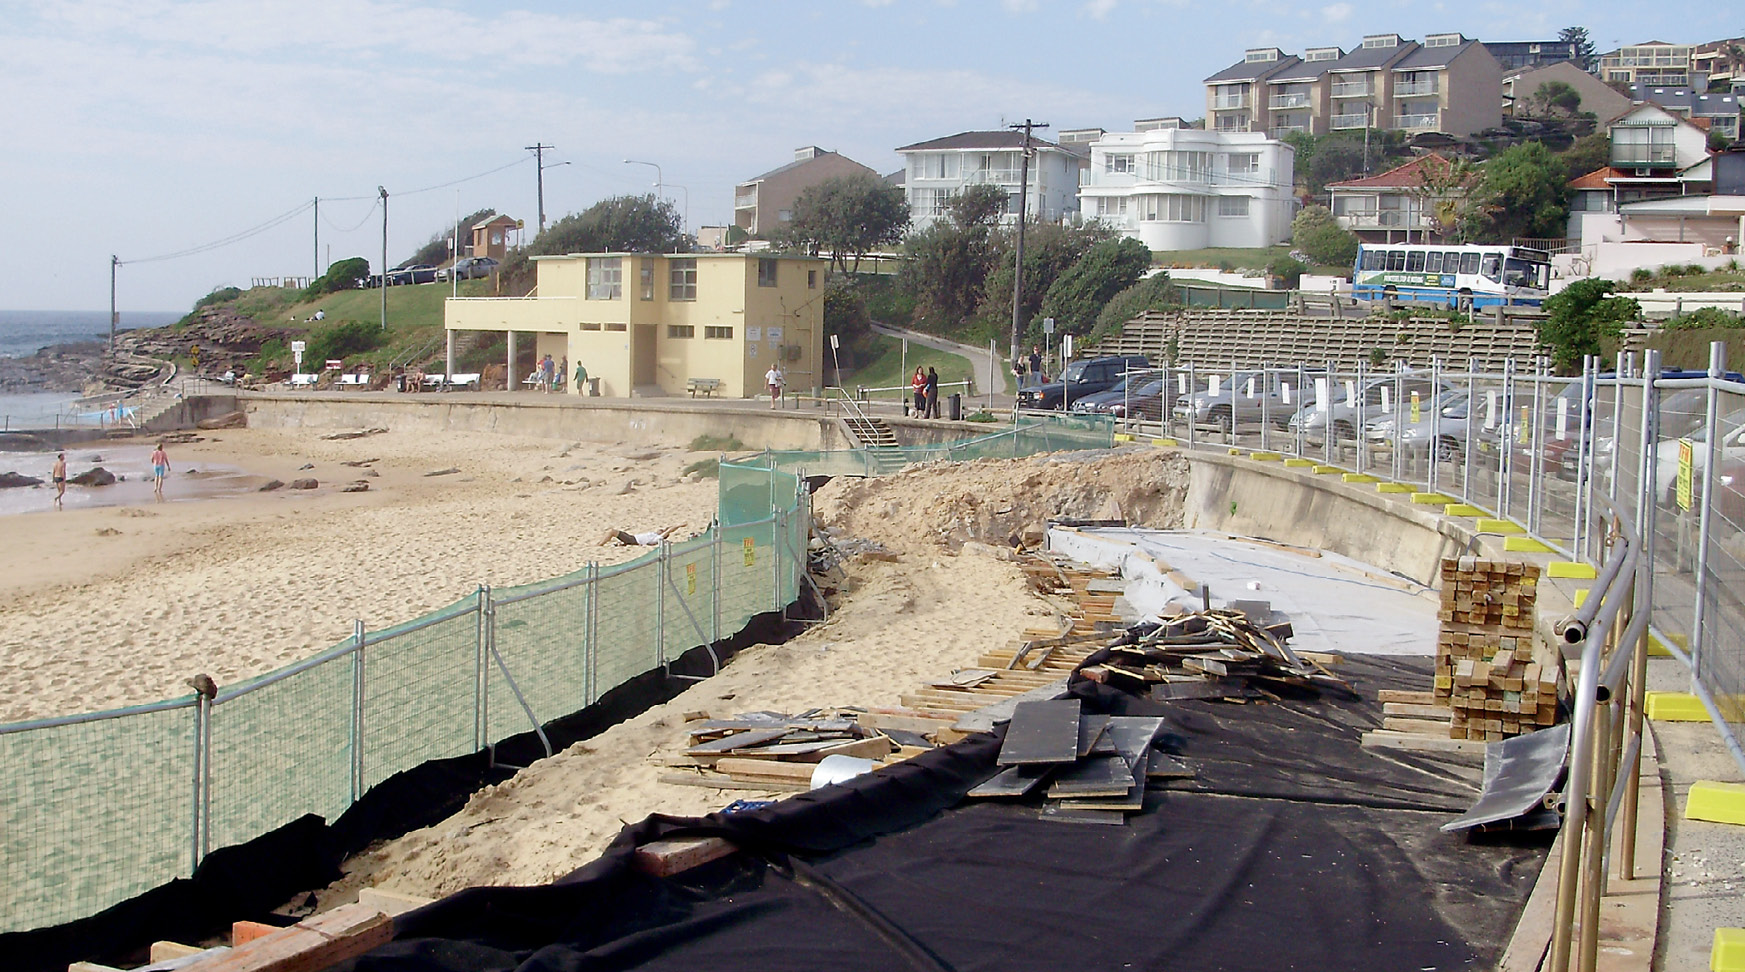 Photograph of the construction site on the beach.